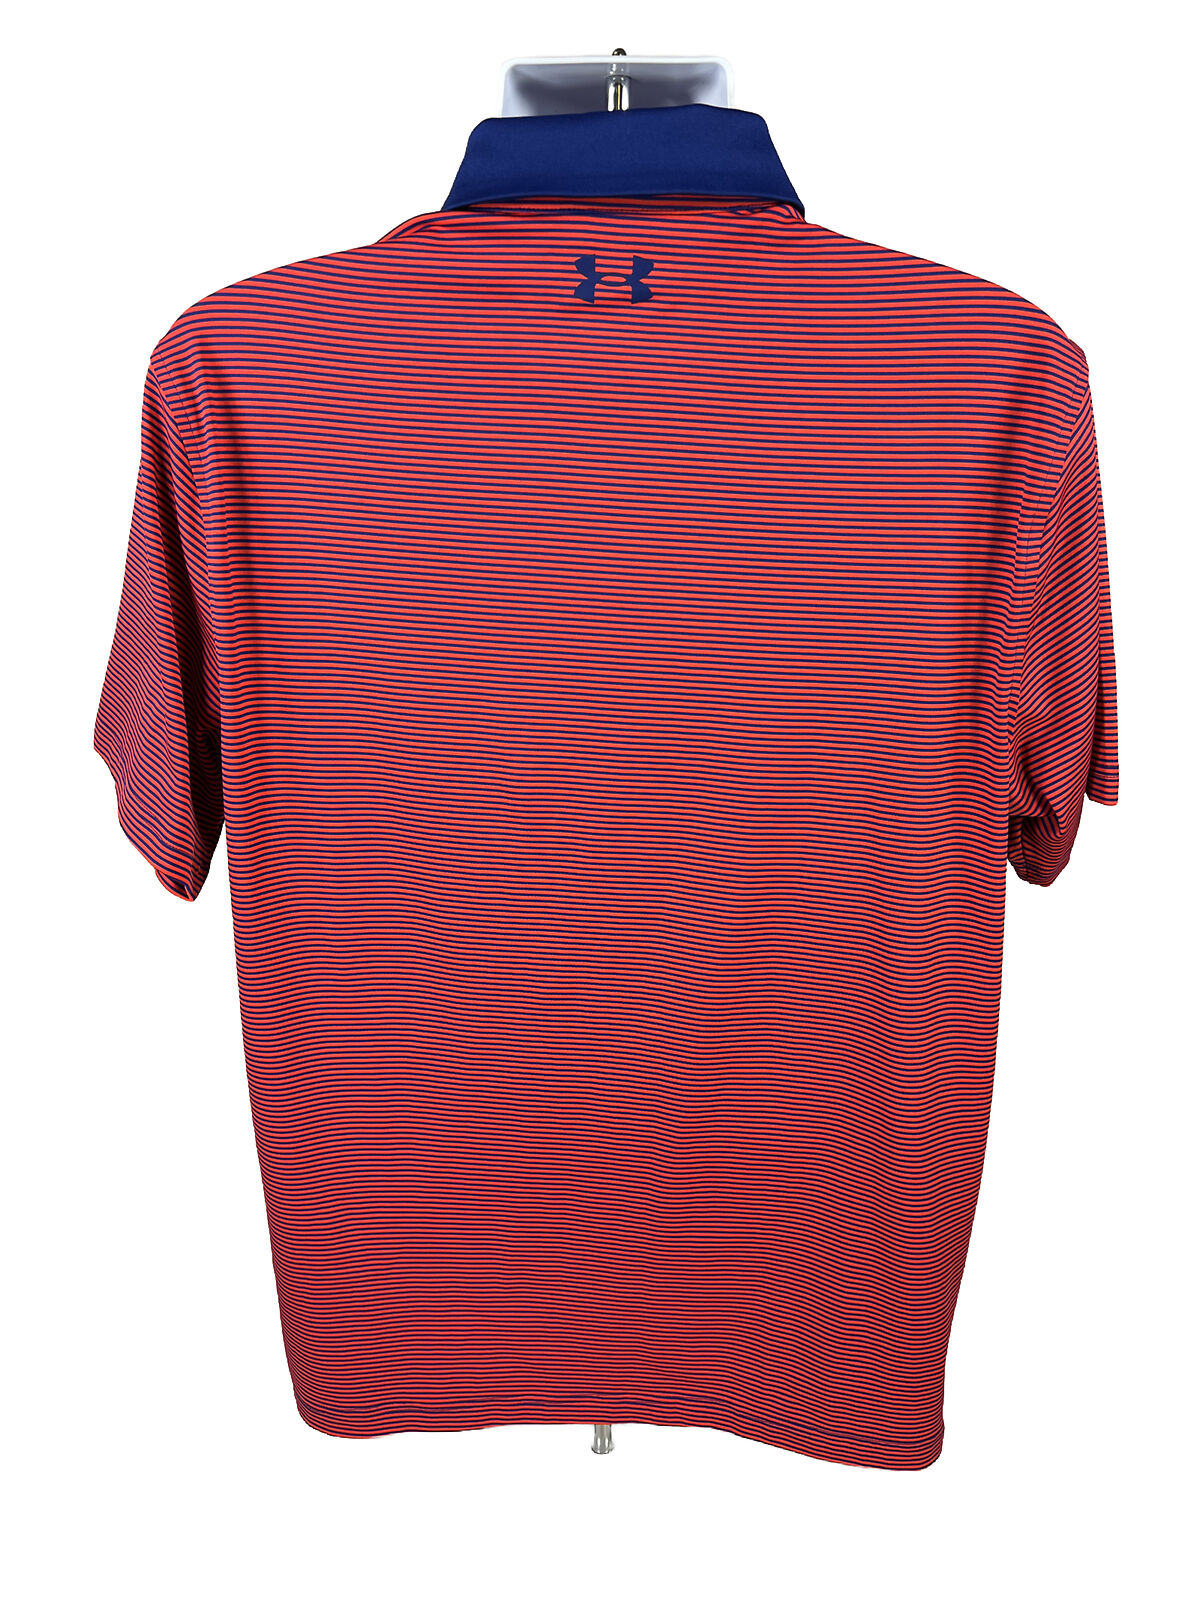 Under Armour Men's Red/Blue Striped Performance Athletic Polo Shirt - L